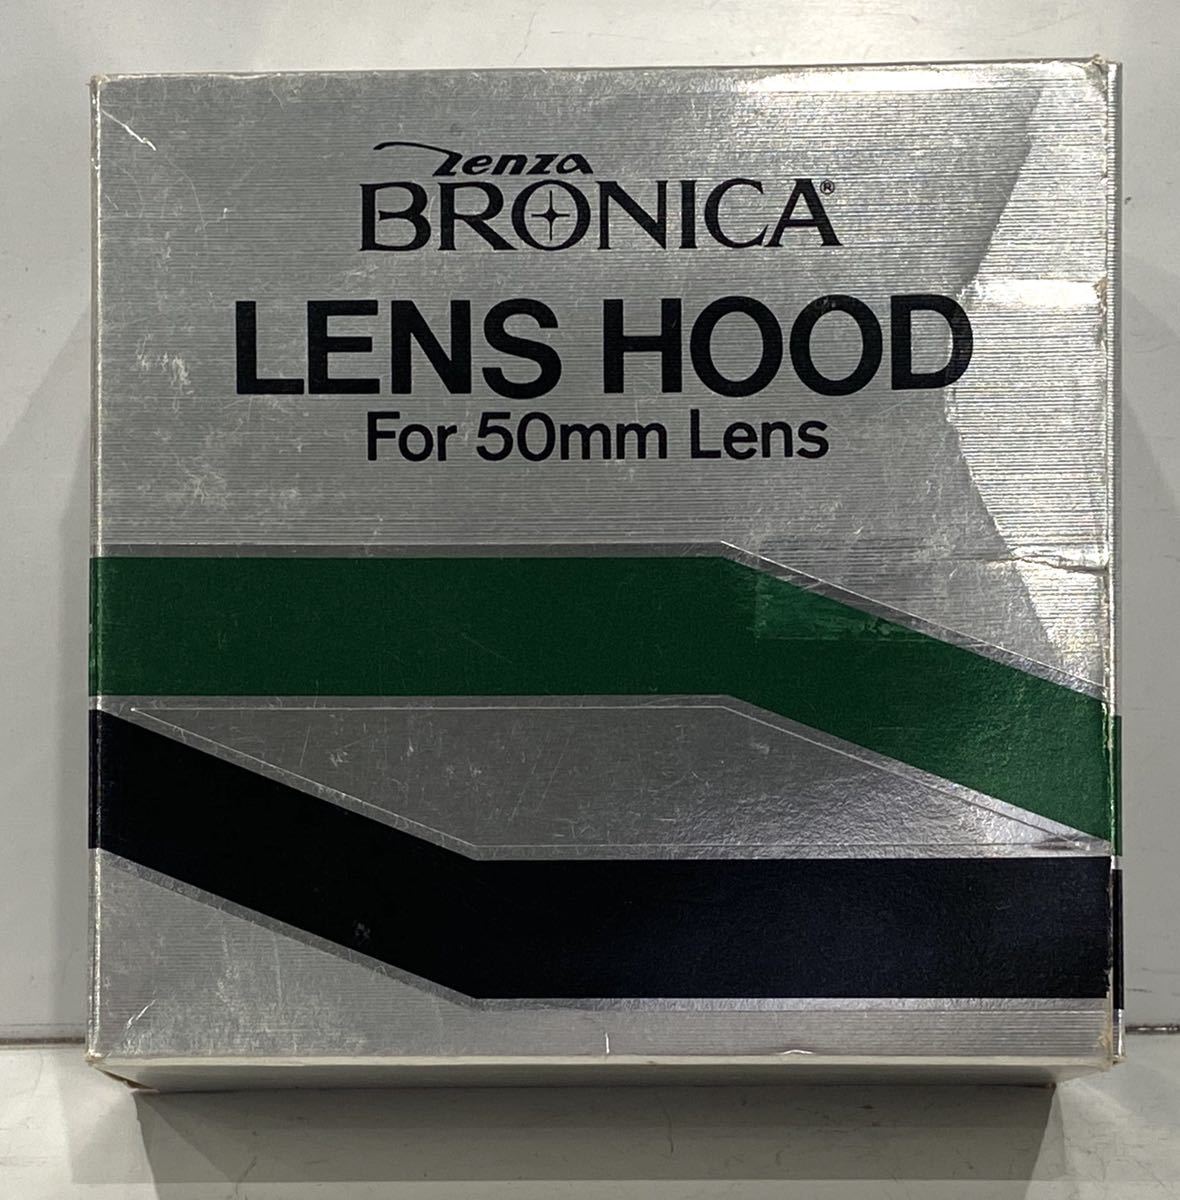 20826A☆ ZENZA BRONICA メタルレンズフード for 50mm Lens 元箱有り ♪配送方法＝ヤフネコ宅急便サイズ60cm♪ ブロニカ